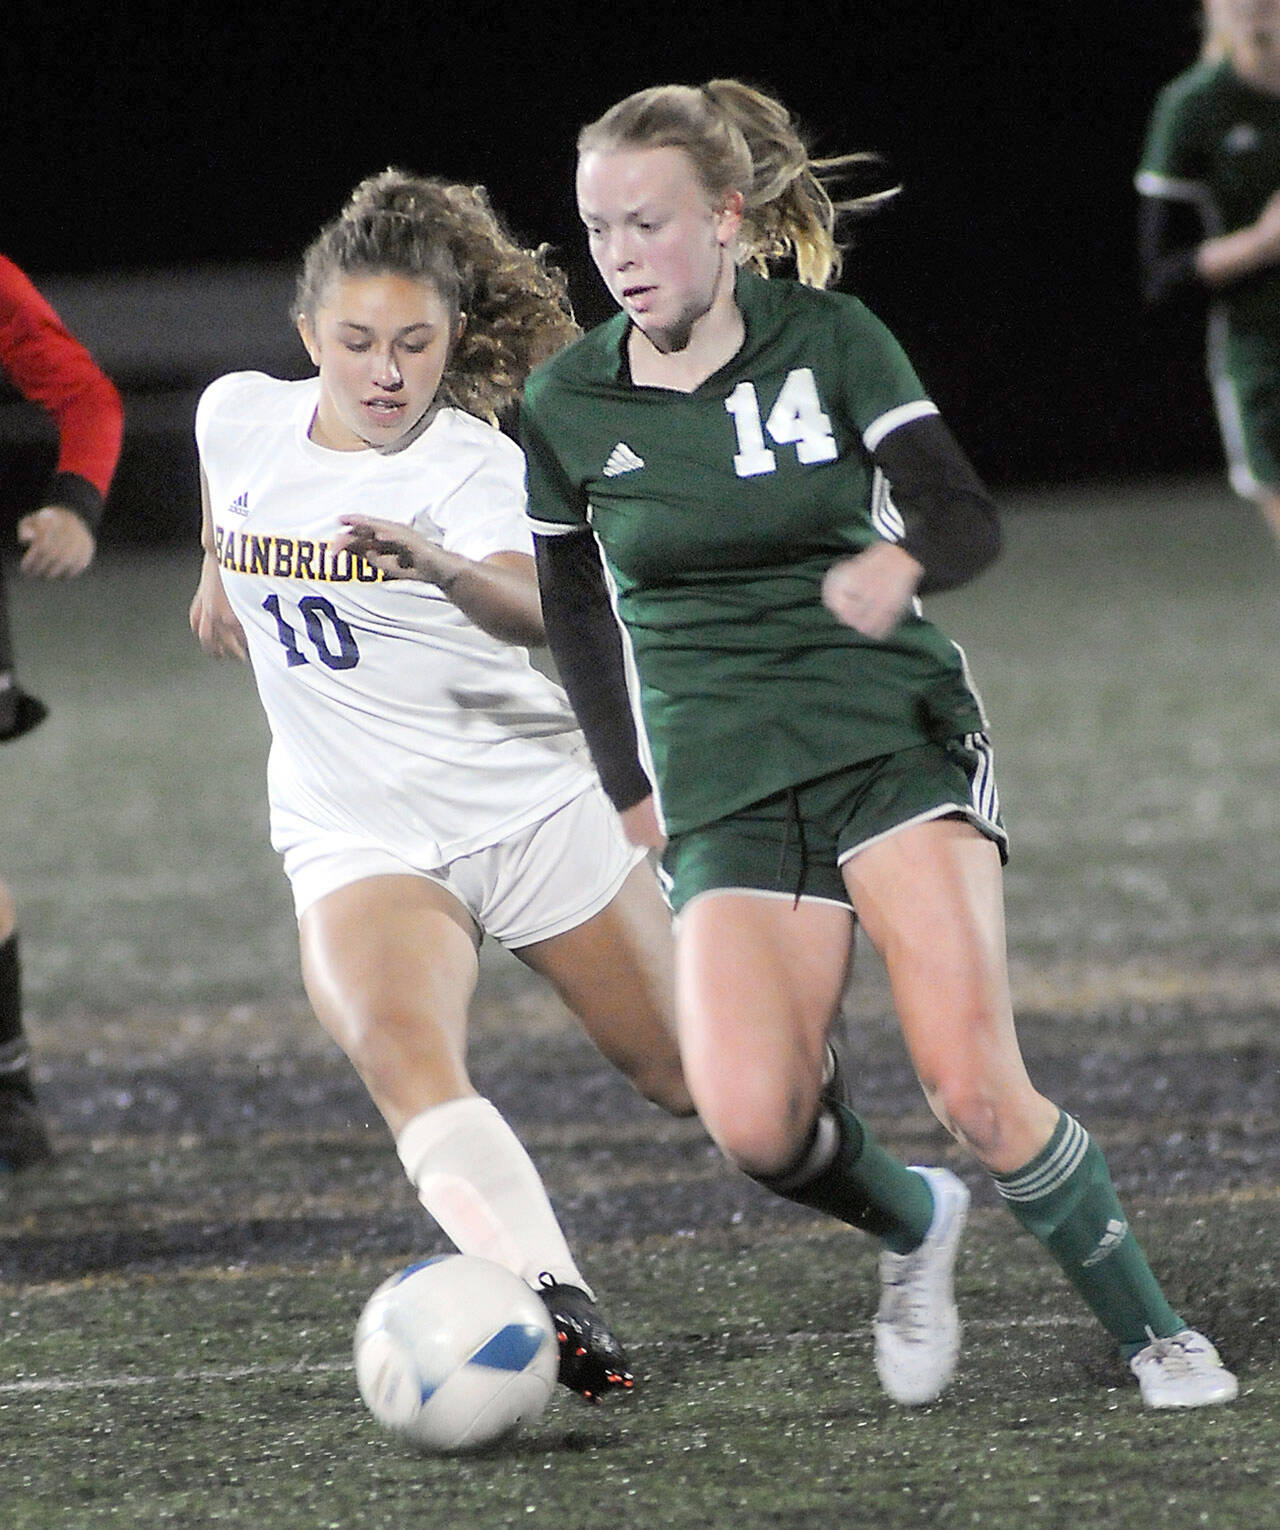 Port Angeles’ Anna Petty, right, races past Bainbridge’s Sophia Weindl during Tuesday’s match at Wally Sigmar Field in Port Angeles. (Keith Thorpe/Peninsula Daily News)